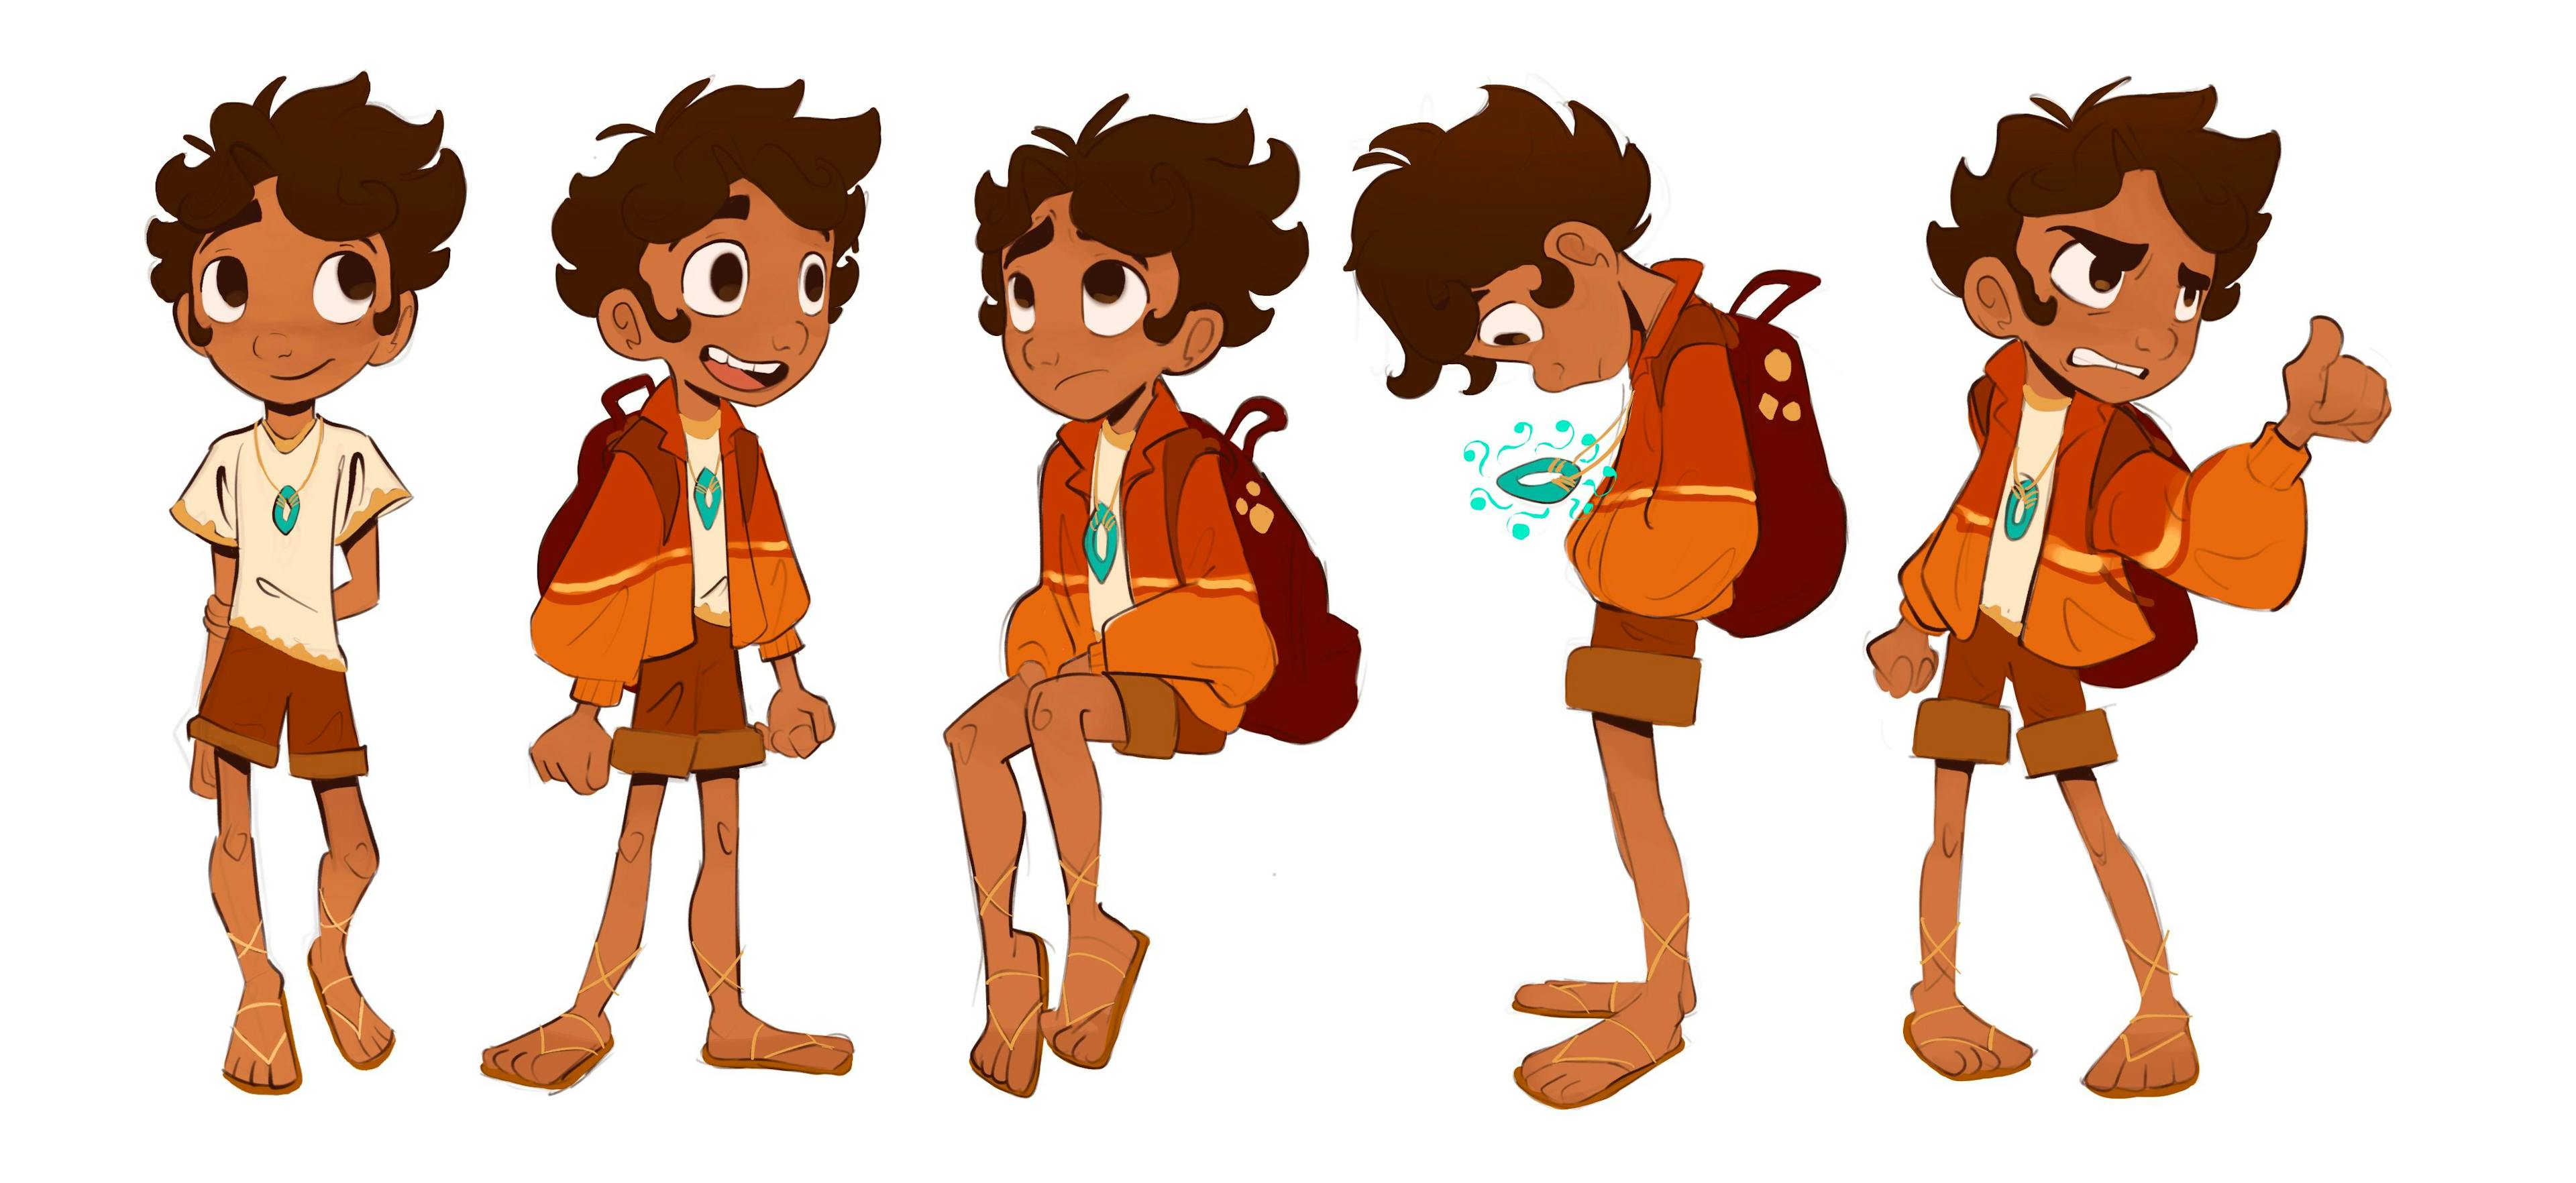 Character study of a boy